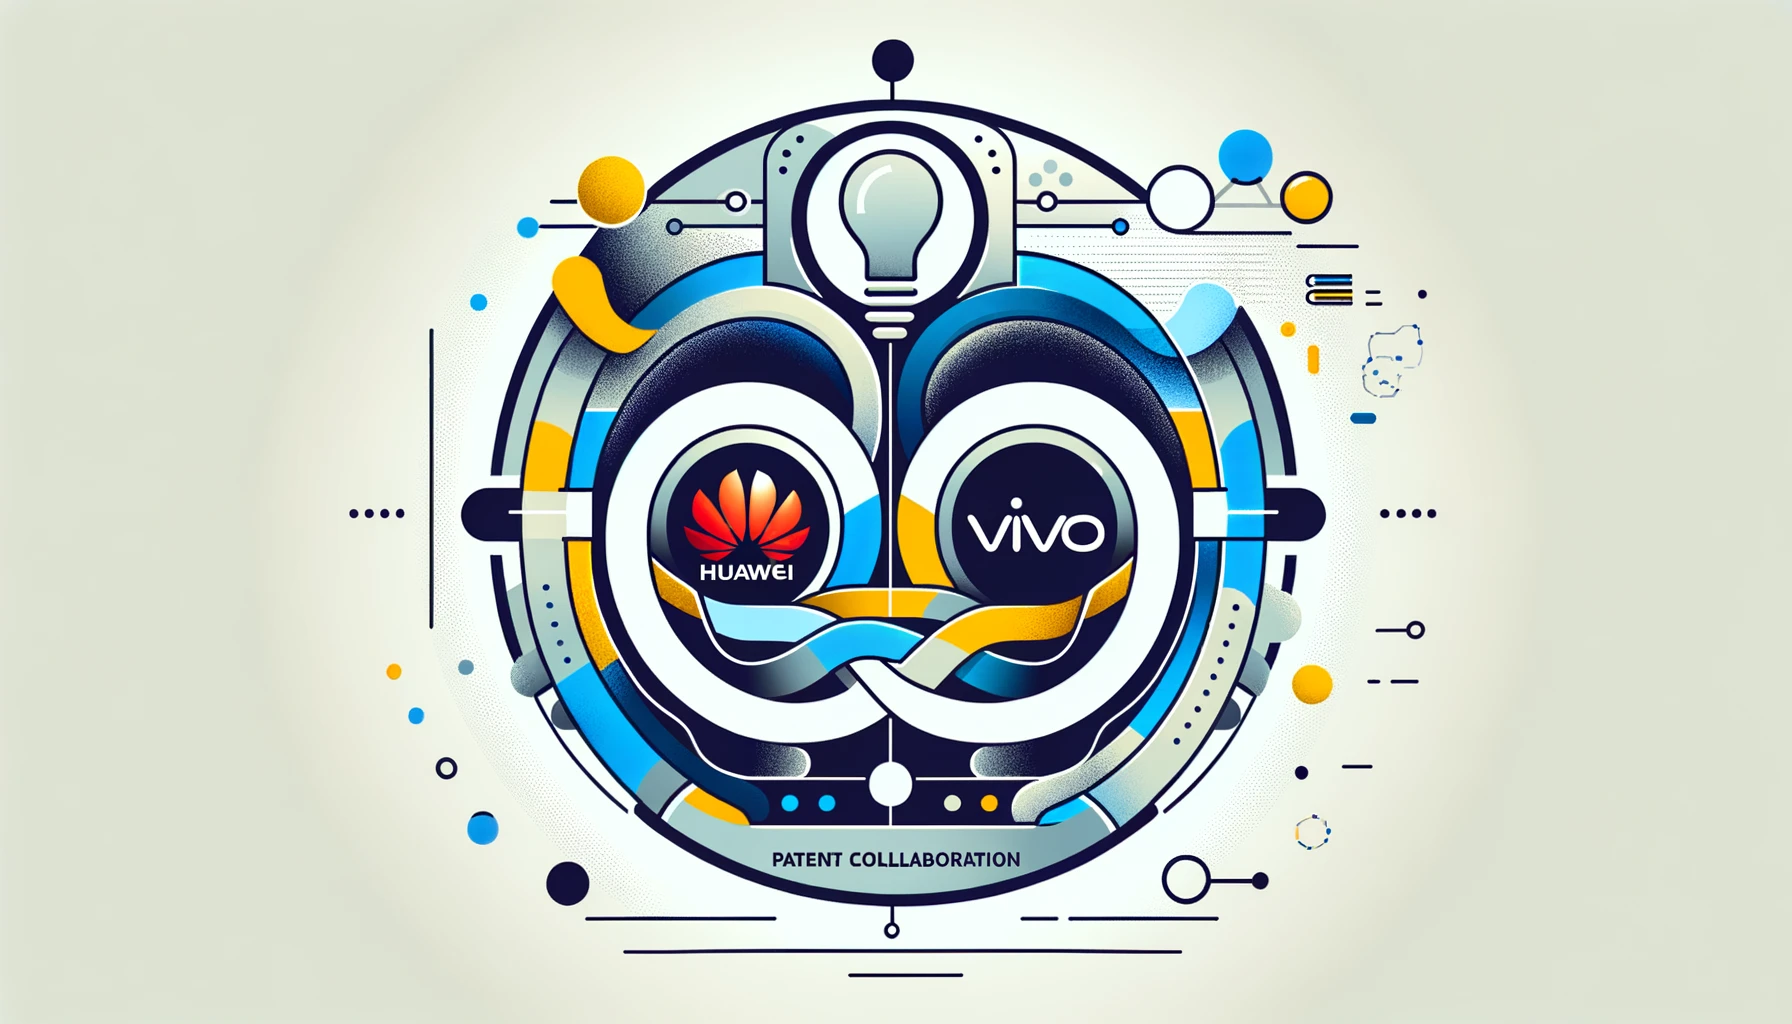 Huawei and Vivo proudly establish a pioneering patent collaboration